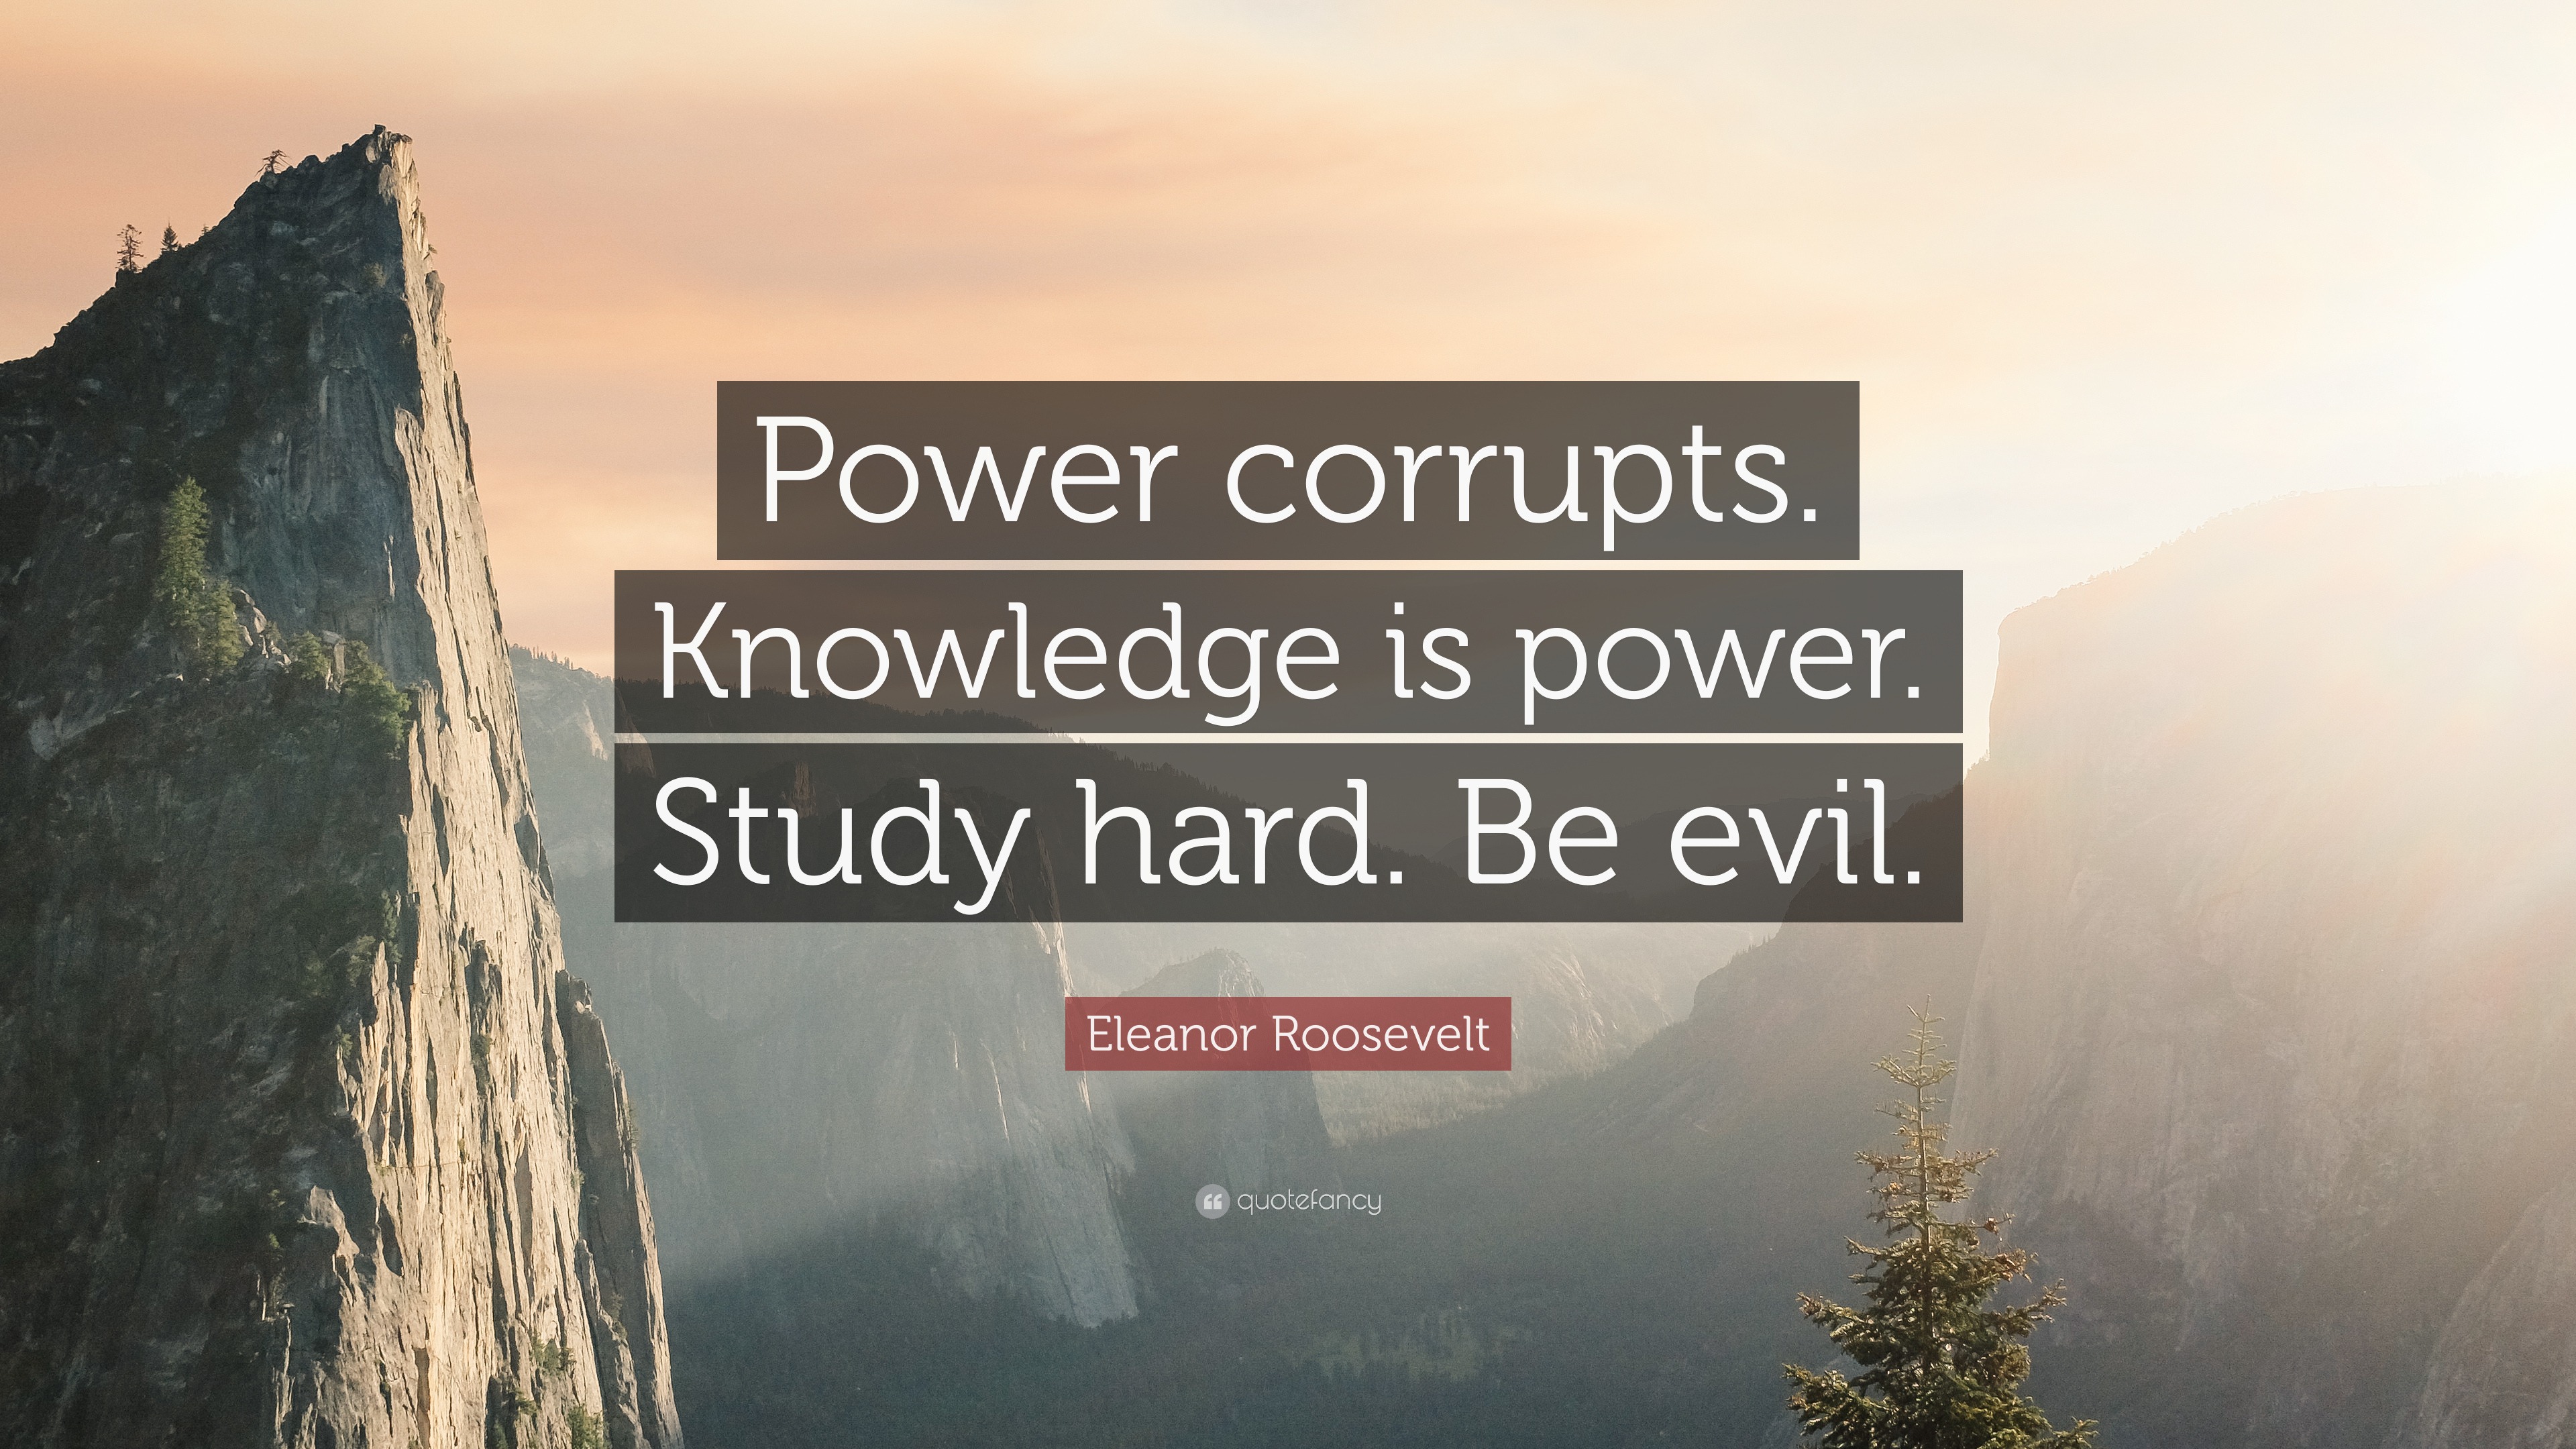 Eleanor Roosevelt Quote “Power corrupts. Knowledge is